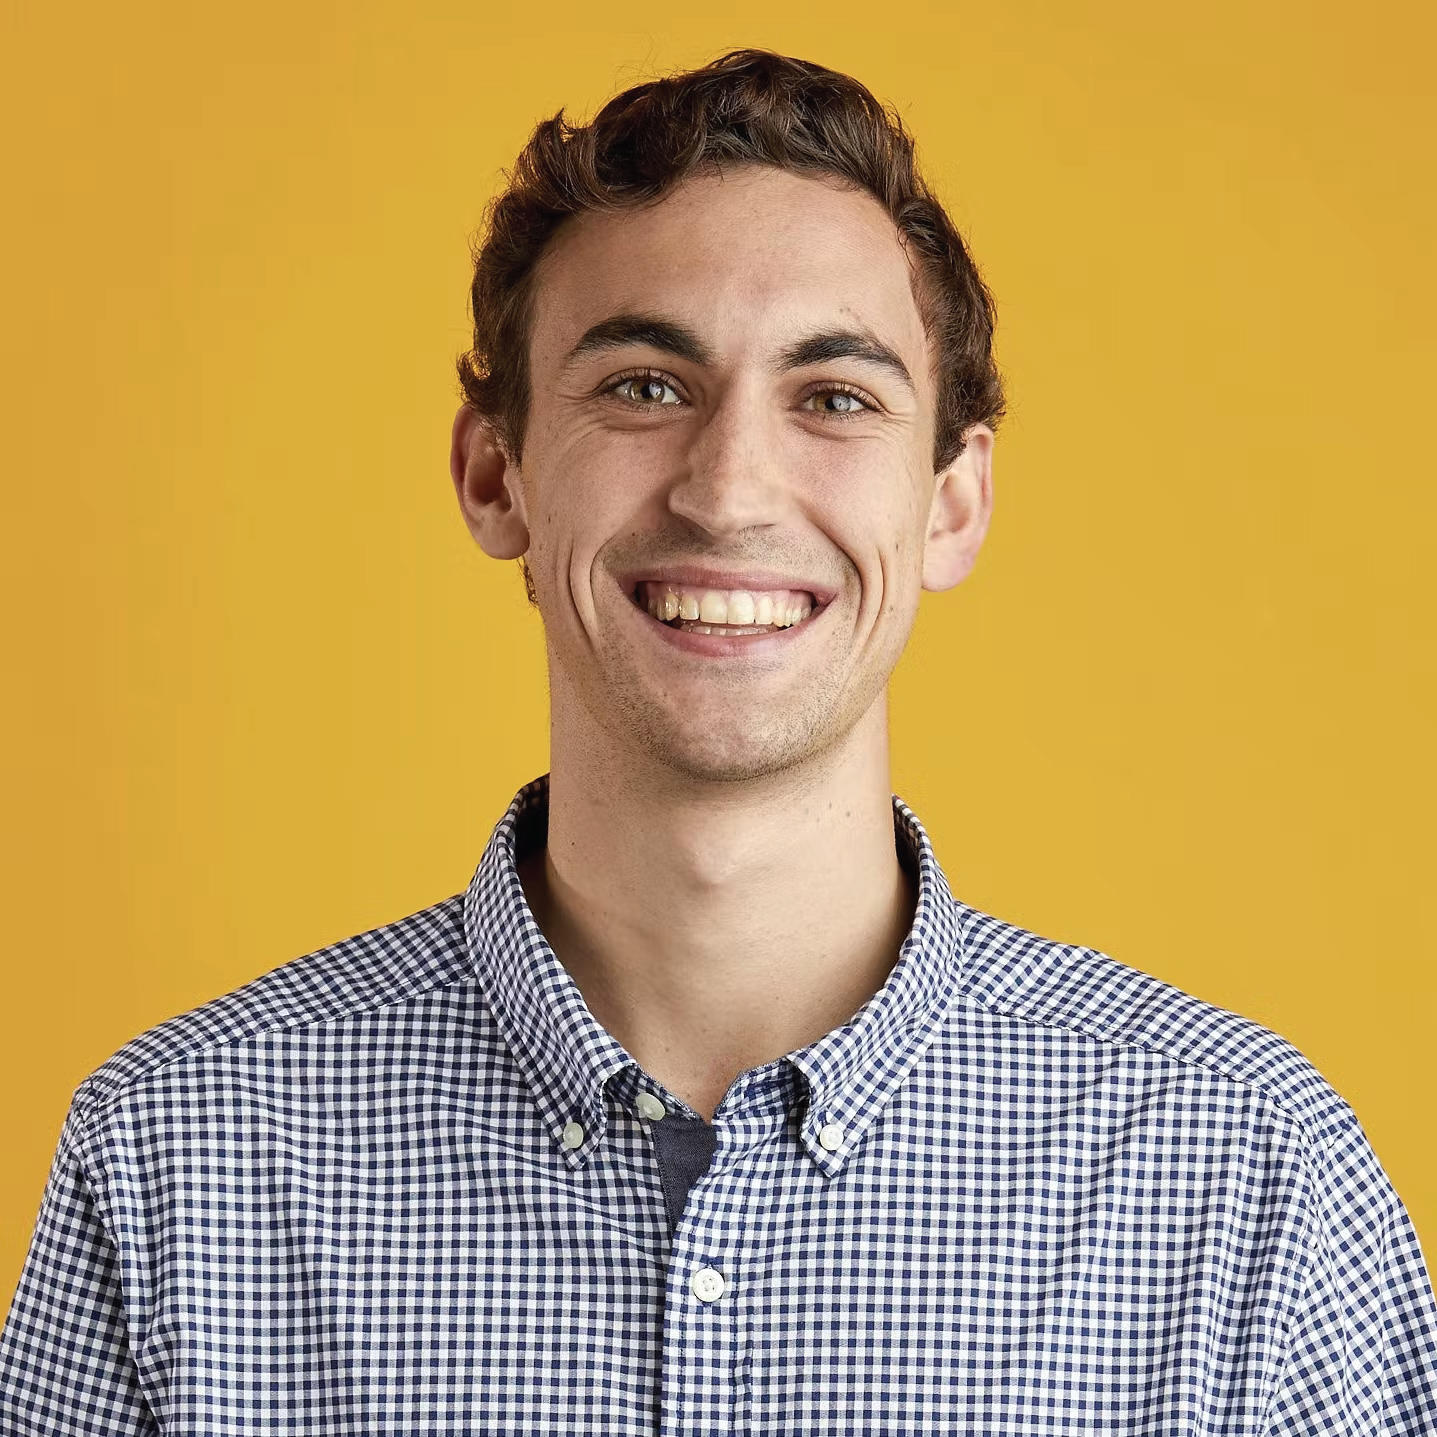 Tristan is a person with short brown hair and brown eyes. They are smiling and wearing a blue checkered, button-up shirt. They are standing in front of a yellow background.